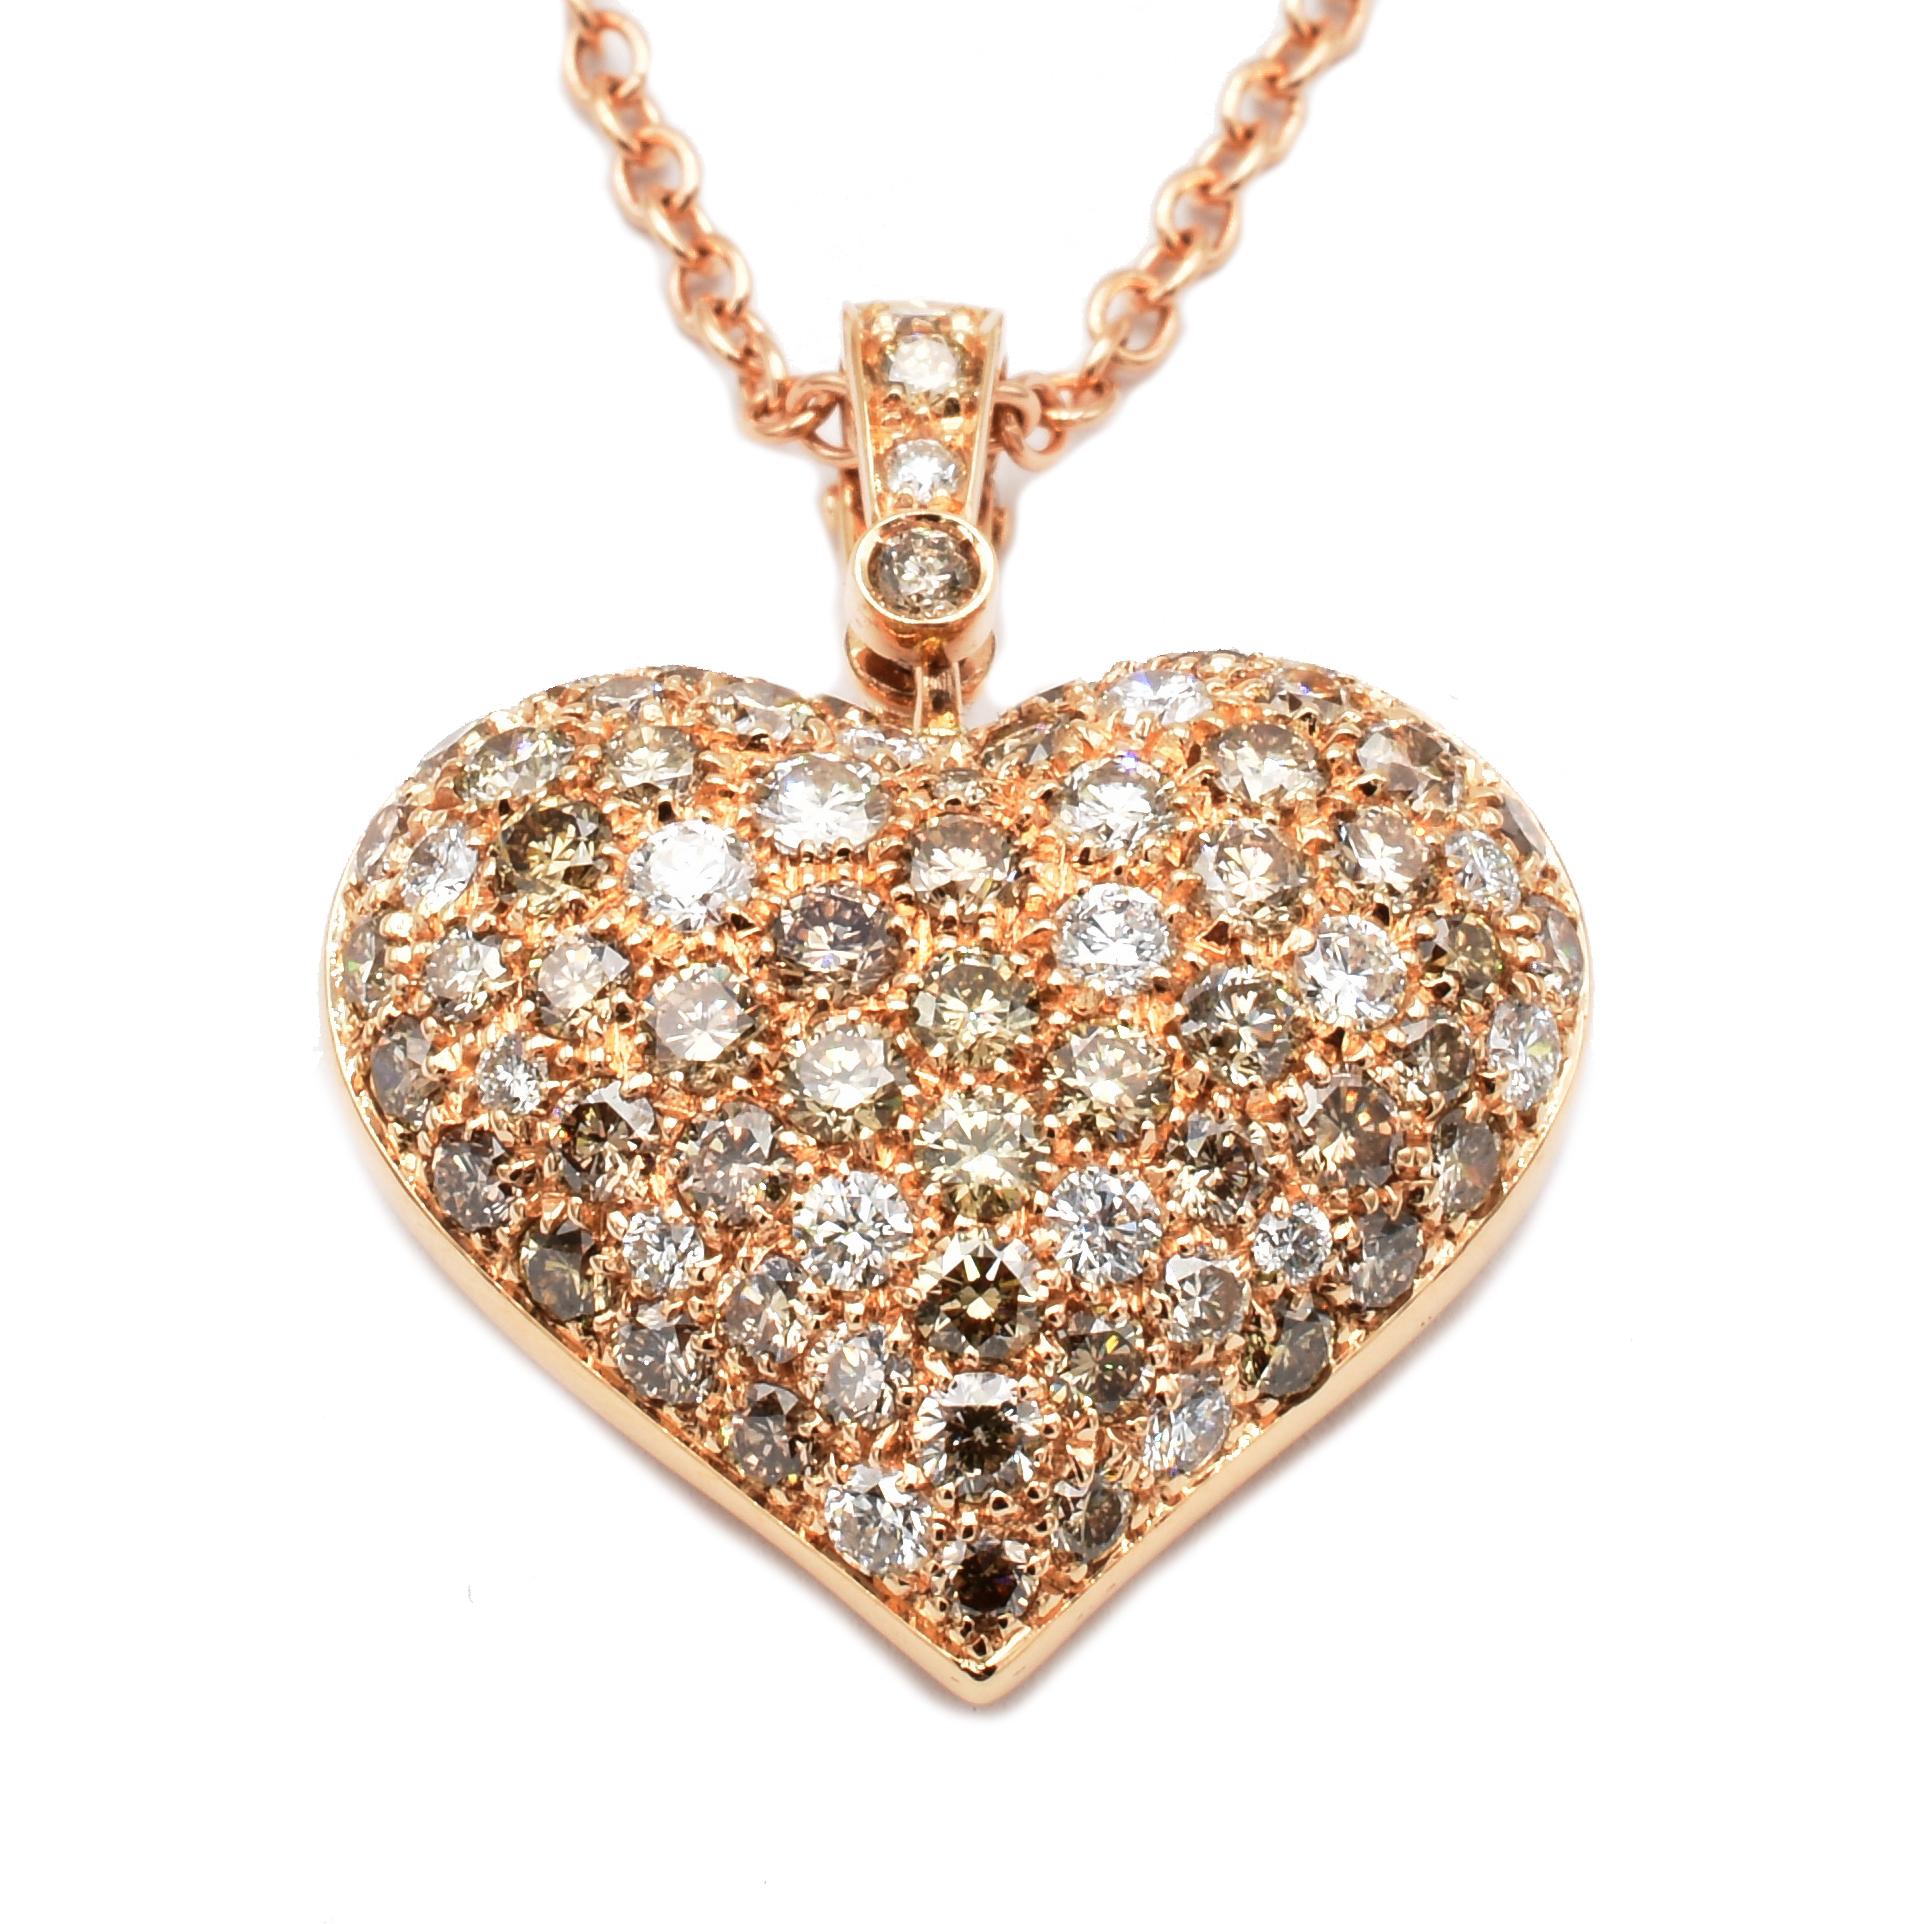 18Kt Rose Gold Heart Pendant Necklace with a mix of Champagne Diamonds (80%) and White Diamonds (20%).
Handmade in Italy in Our Atelier in Valenza (AL).
18Kt Gold g 9.70
Champagne Diamonds ct 1.26
G Color Vs Clarity White Diamonds ct 0.48
Beautiful